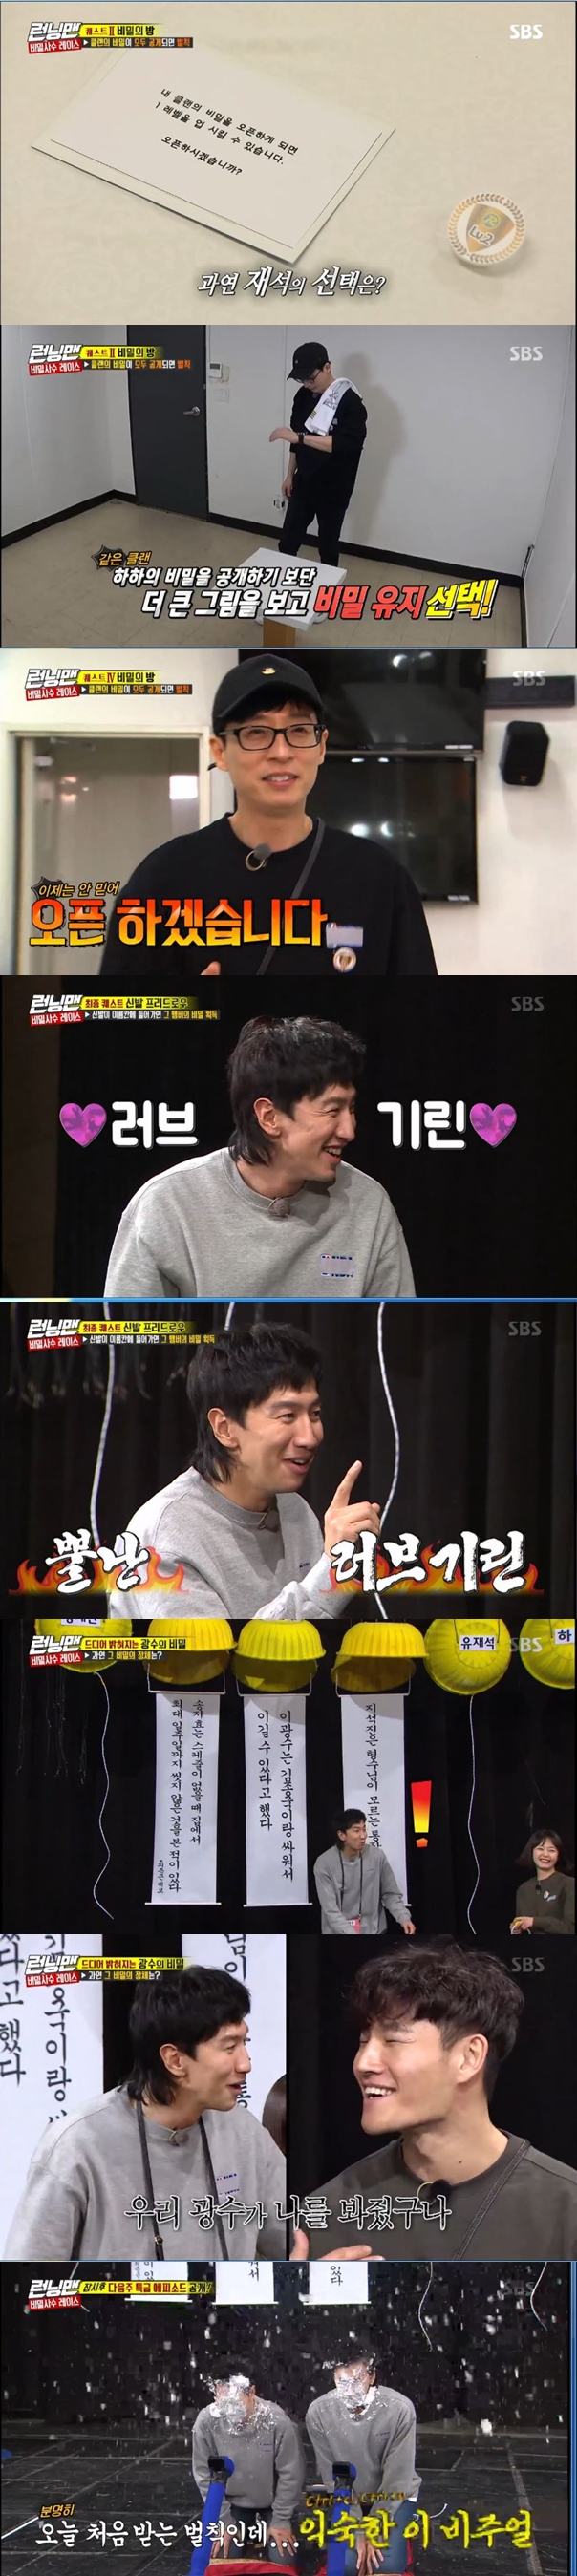 Lee Kwang-soo won Love but had nothing in the game.On the afternoon of the 13th, SBS entertainment program Running Man showed members doing The Secret Shooter Race with the clan that was formed last week.Members had to keep the same Clans The Secret to the end to win the race.Yoo Jae-Suk told Haha, the same clan in the opening, You really have to keep the end of The Secret.It is a big thing, he said, and Haha also threatened Yo Jae-Suk and wondered about the members The Secret.The place where the members were headed for the game was the basketball court; those who were waiting for the members at the basketball court were professional basketball all-star players.The members were resilient when the players representing each team, including Yang Hee-jong, Kim Jong-gyu and Yang Hong-seok, appeared with tricks.Especially, female members Song Ji-hyo and Jean So-min liked the players more.Lee Kwan-hee showed a wit to listen to the members. Lee Kwan-hee mentioned the name of Jean So-min first, saying in an interview that there were two people who were usually fans.So Song Ji-hyo expected his name to be called, but Lee Kwan-hees name of Ji Suk-jin came out and embarrassed her.Lee Kwan-hee laughed because he said, I want to live thin and long like Ji Suk-jin.In a game with the players, the Yoo Jae-Suk and Haha teams won; the members who recruited the players with the deficit were in a hurry to shoot each shot of the players.Kim Jong Kook Jeon So-min teams posters succeeded in three consecutive goals with rubber gloves, but in the final match, Yo Jae-Suk failed to score a negative, and Yoo Jae-Suk and Haha team won the final victory and received the mission fee.Yoo Jae-Suk gave up the opportunity to level up; Yoo Jae-Suk entered the mission room, checked the mission and panicked.The mission said whether to open The Secret of the Clan or not. Yo Jae-Suk was worried, but eventually decided to keep The Secret.However, I confirmed that Hahas level from the mission room has risen and pledged to see revenge.Haha said, I was a mission to eat rice cake, but Yoo Jae-Suk did not believe it.In the next mission, Kang Seung-yoon, Lee Seung-hoon, Cheongha and Do-yeon were waiting for the members. The mission for the members together with the four was to dance.In the first match, Yoo Jae-Suk Haha team who recruited Doyeon and Kim Jong-guk Jeon So-min team who recruited Lee Seung-hoon confronted.The team that won the under-the-table showdown was the Yoo Jae-Suk Haha team.The Yoo Jae-Suk Haha team also won the final against Yang Se-chan Song Ji-hyo.However, in the game that receives the mission fee, Doyeon only succeeded in raising the kick once, so it only won the 10,000 won.Lee Kwang-soo laughed and laughed, saying, Jae Seok-hyung worked hard all day and did not make much money.Then came the time of choice for the members, too: Lee Kwang-soo said, Ill open it without a seconds trouble as soon as he entered the room, embarrassing the production crew.Kim Jong-guk and Jeon So-min then made the opposite choice as usual: If it was someone else, it would open, but Ill keep it because its Kim Jong-guk, said Jeon So-min.But Kim Jong-kook said, I will open it because I dont want to get hurt. The rest of the members also chose to raise the level in their respective choices.Lee Kwang-soo lost 30,000 won in the final quest due to members interruption; in the final quest, he was able to throw his shoes and win the members The Secret.When Lee Kwang-soo came out as the first runner, the members began teasing him, saying, Lovely giraffes. You can do everything you do with love.Lee Kwang-soo failed to concentrate on the members continued interruption and even lost 30,000 won.Lee Kwang-soo has even made the announcement of The Secret.Ji Suk-jin raised expectations by saying that Lee Kwang-soos The Secret would be seeming to see the manly charm of Lee Kwang-soo before it was released.Lee Kwang-soos The Secret said, I said I could win by fighting Kim Jong-guk. Lee Kwang-soos The Secret was released and Kim Jong-guk applied for a duel, saying, Our madman has watched.Lee Kwang-soo, panicking, ran away saying, I guess you ate a lot of alcohol then, followed by a penalty, becoming the only man left with Love.